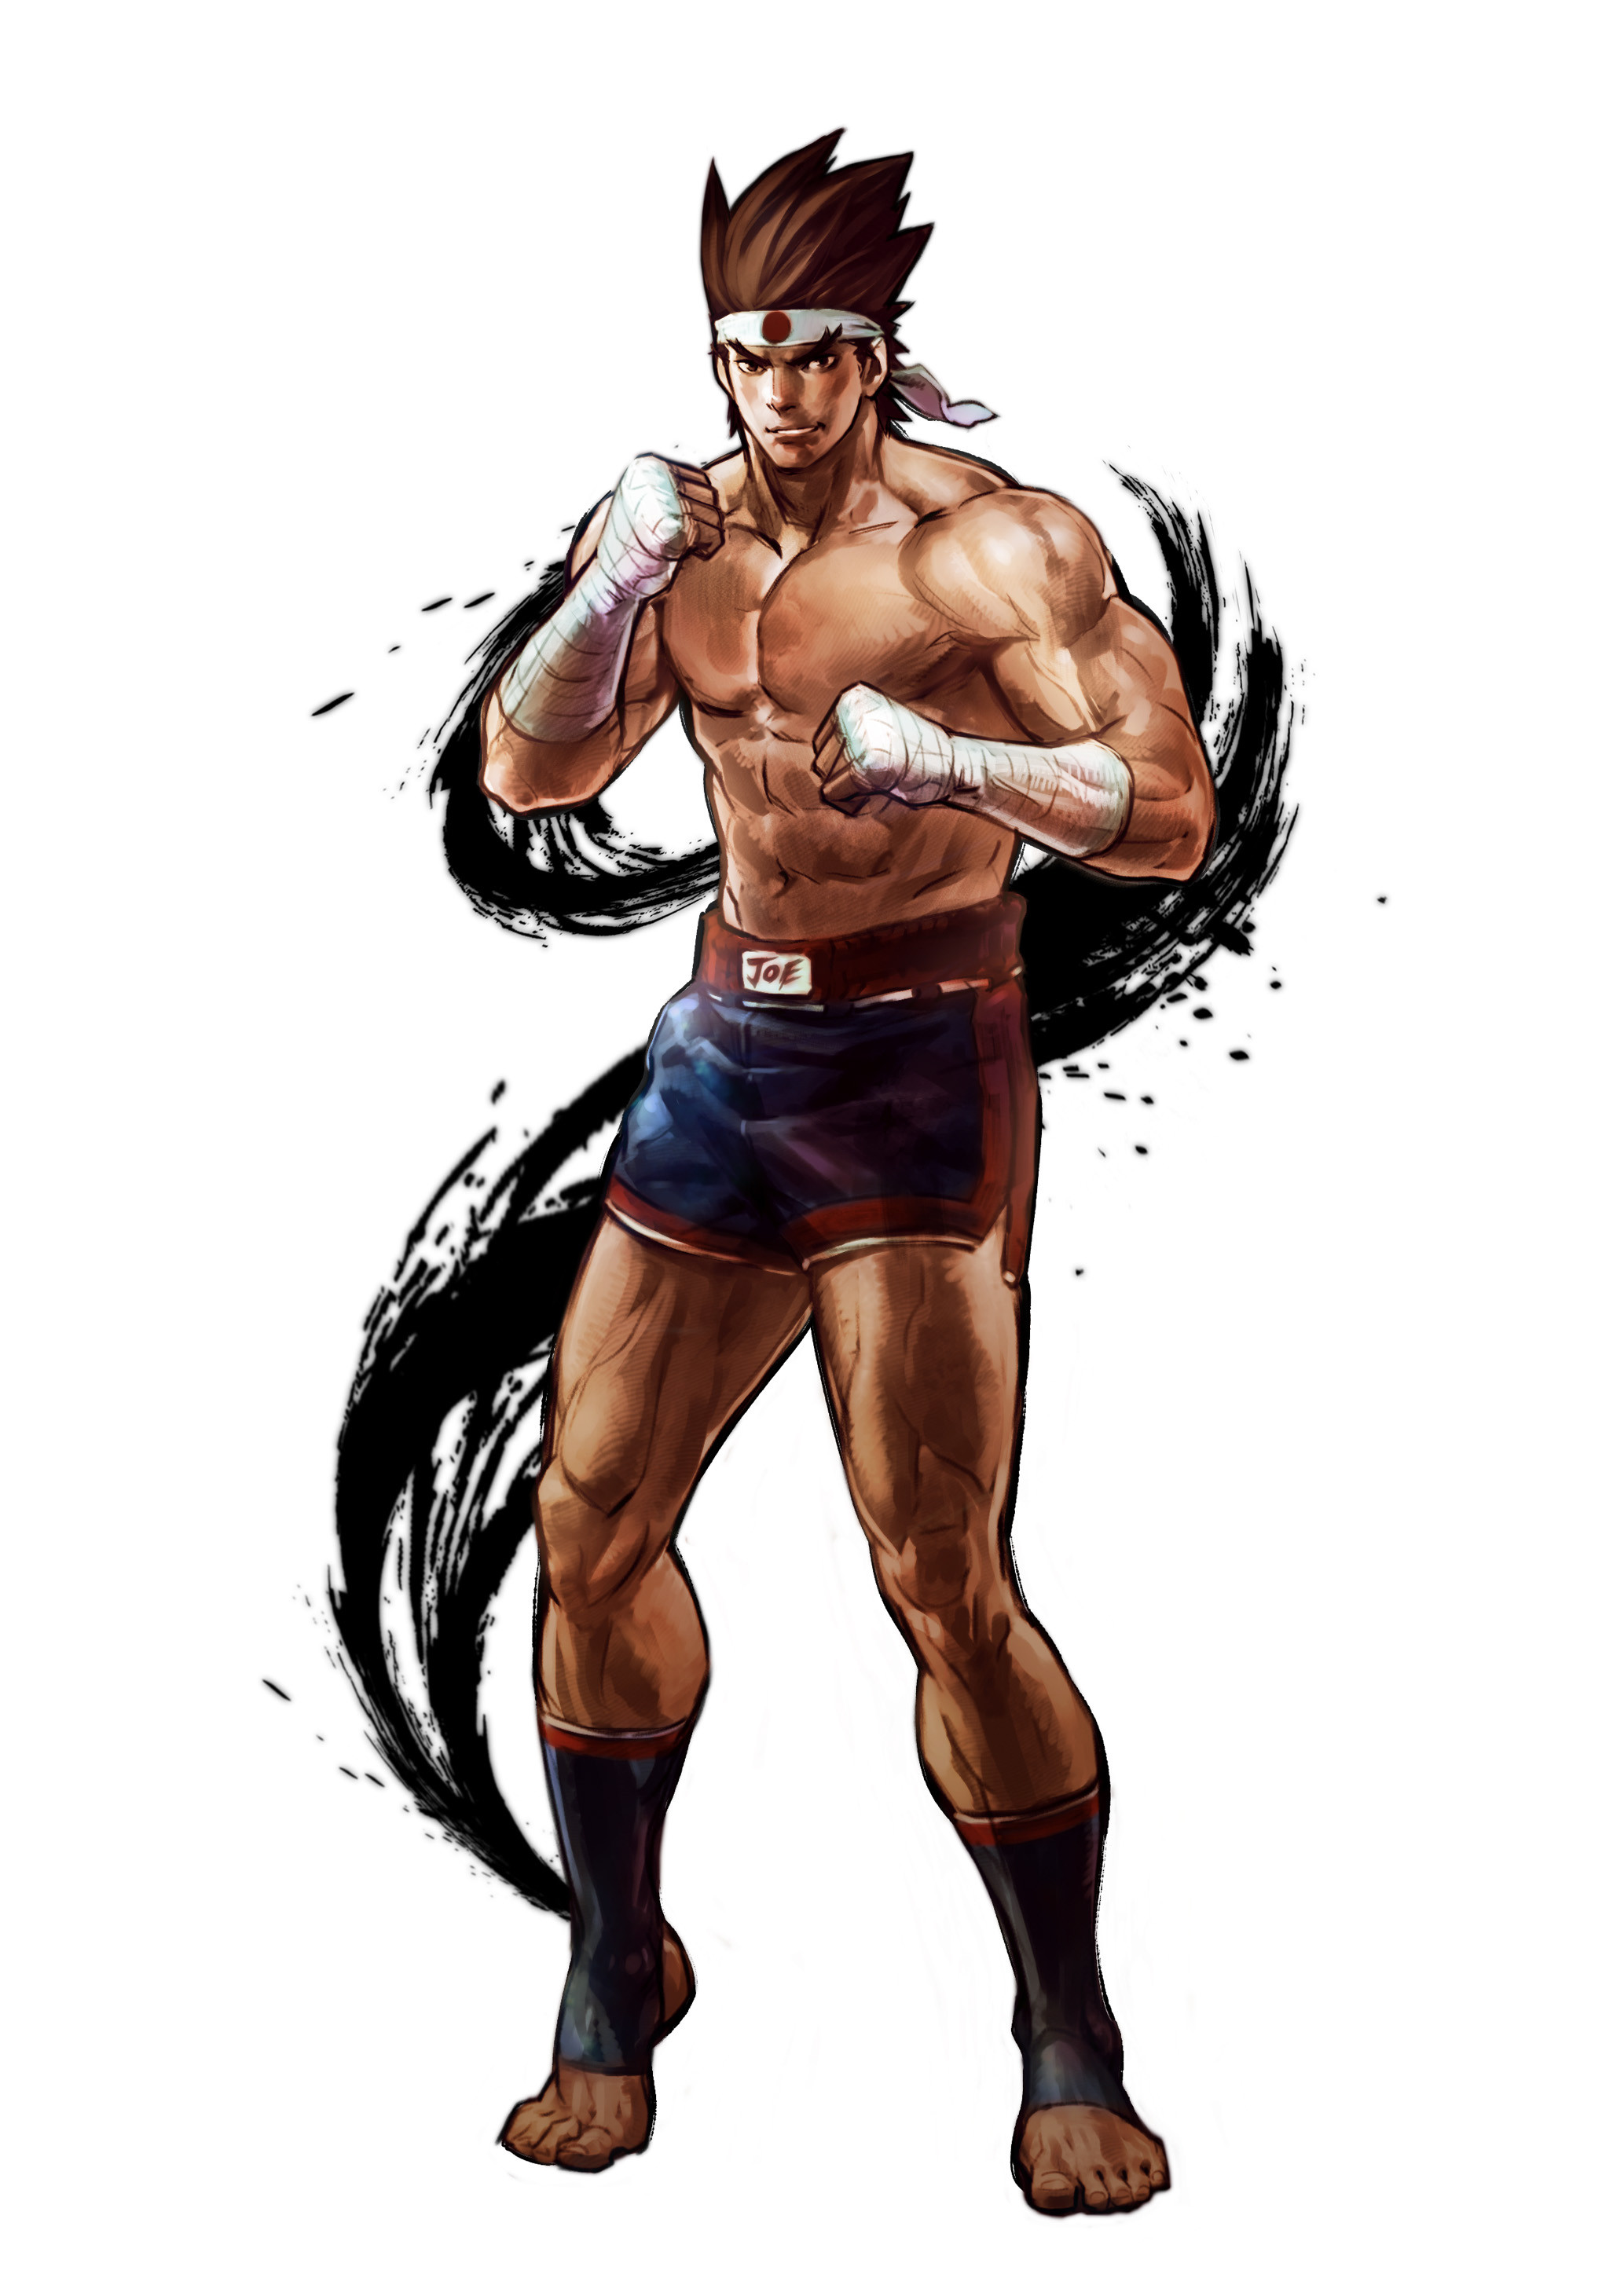 Wallpapers HD Terry Bogard King of Fighters 99 (58+ images)